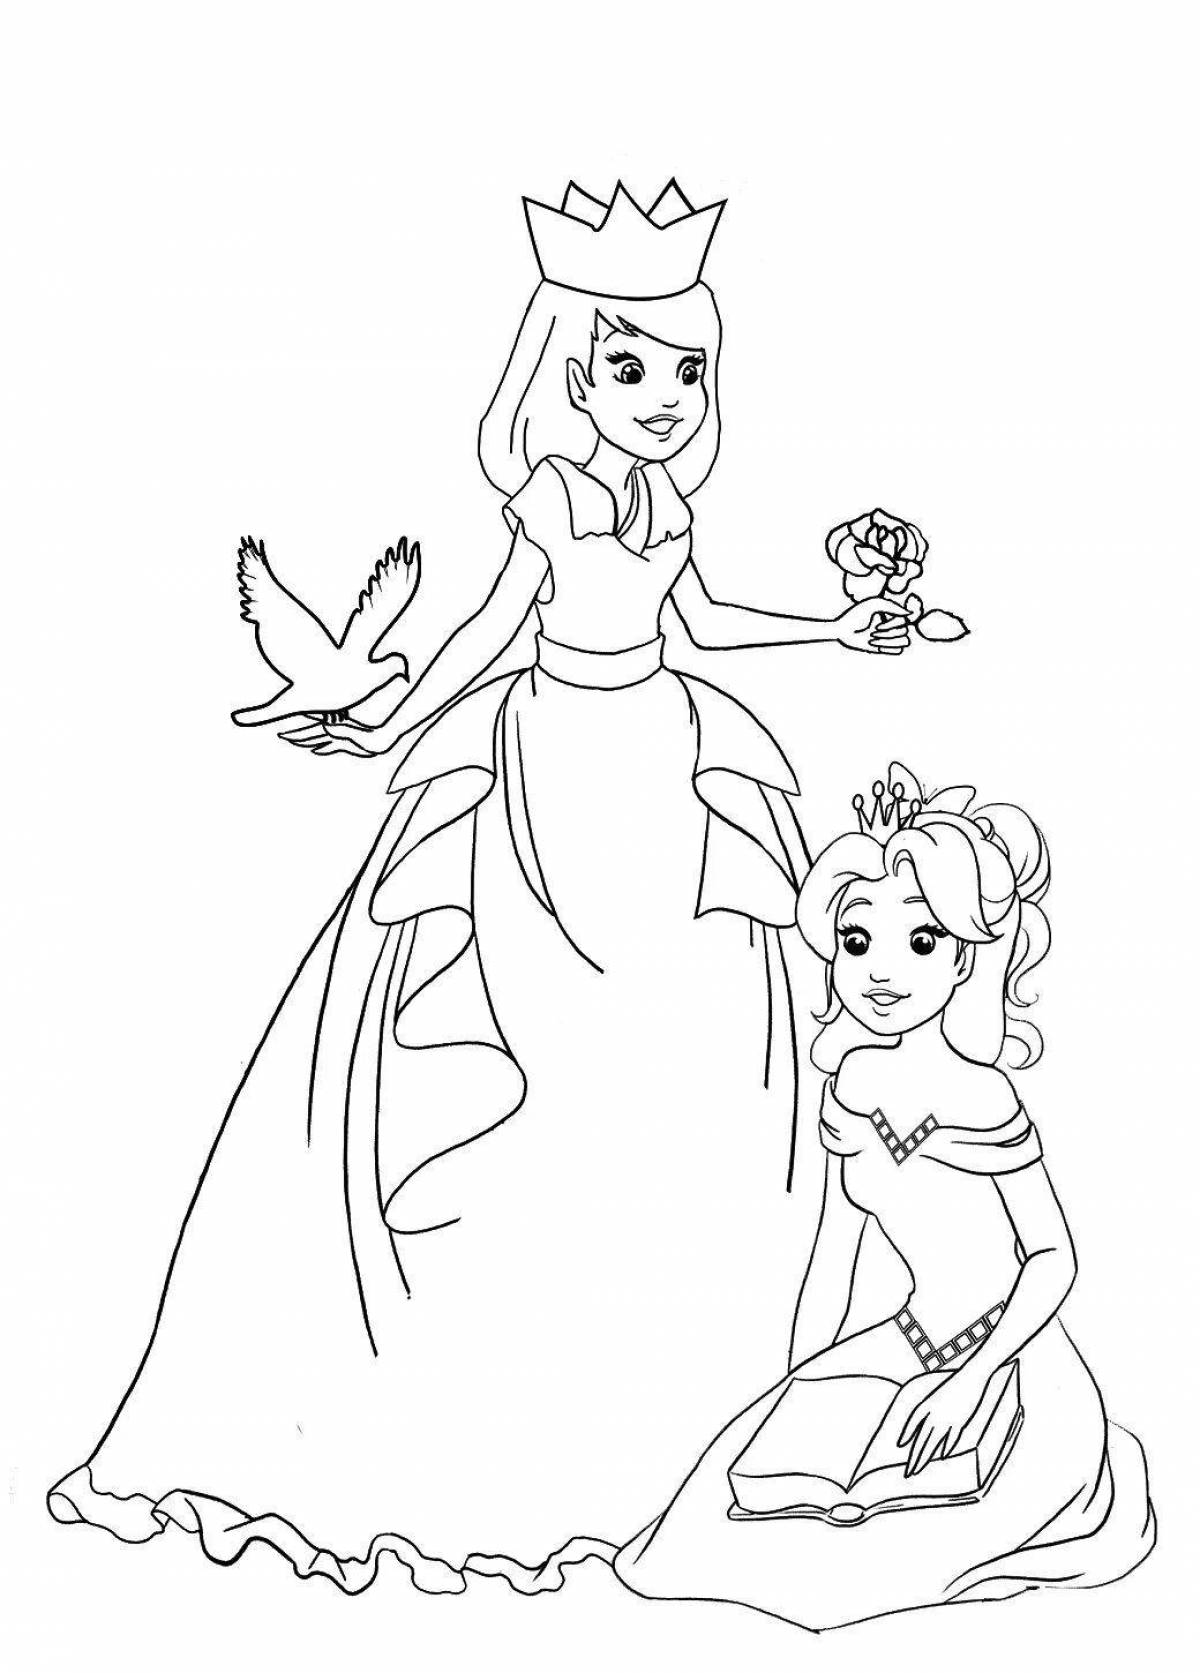 Exalted princess with crown coloring page